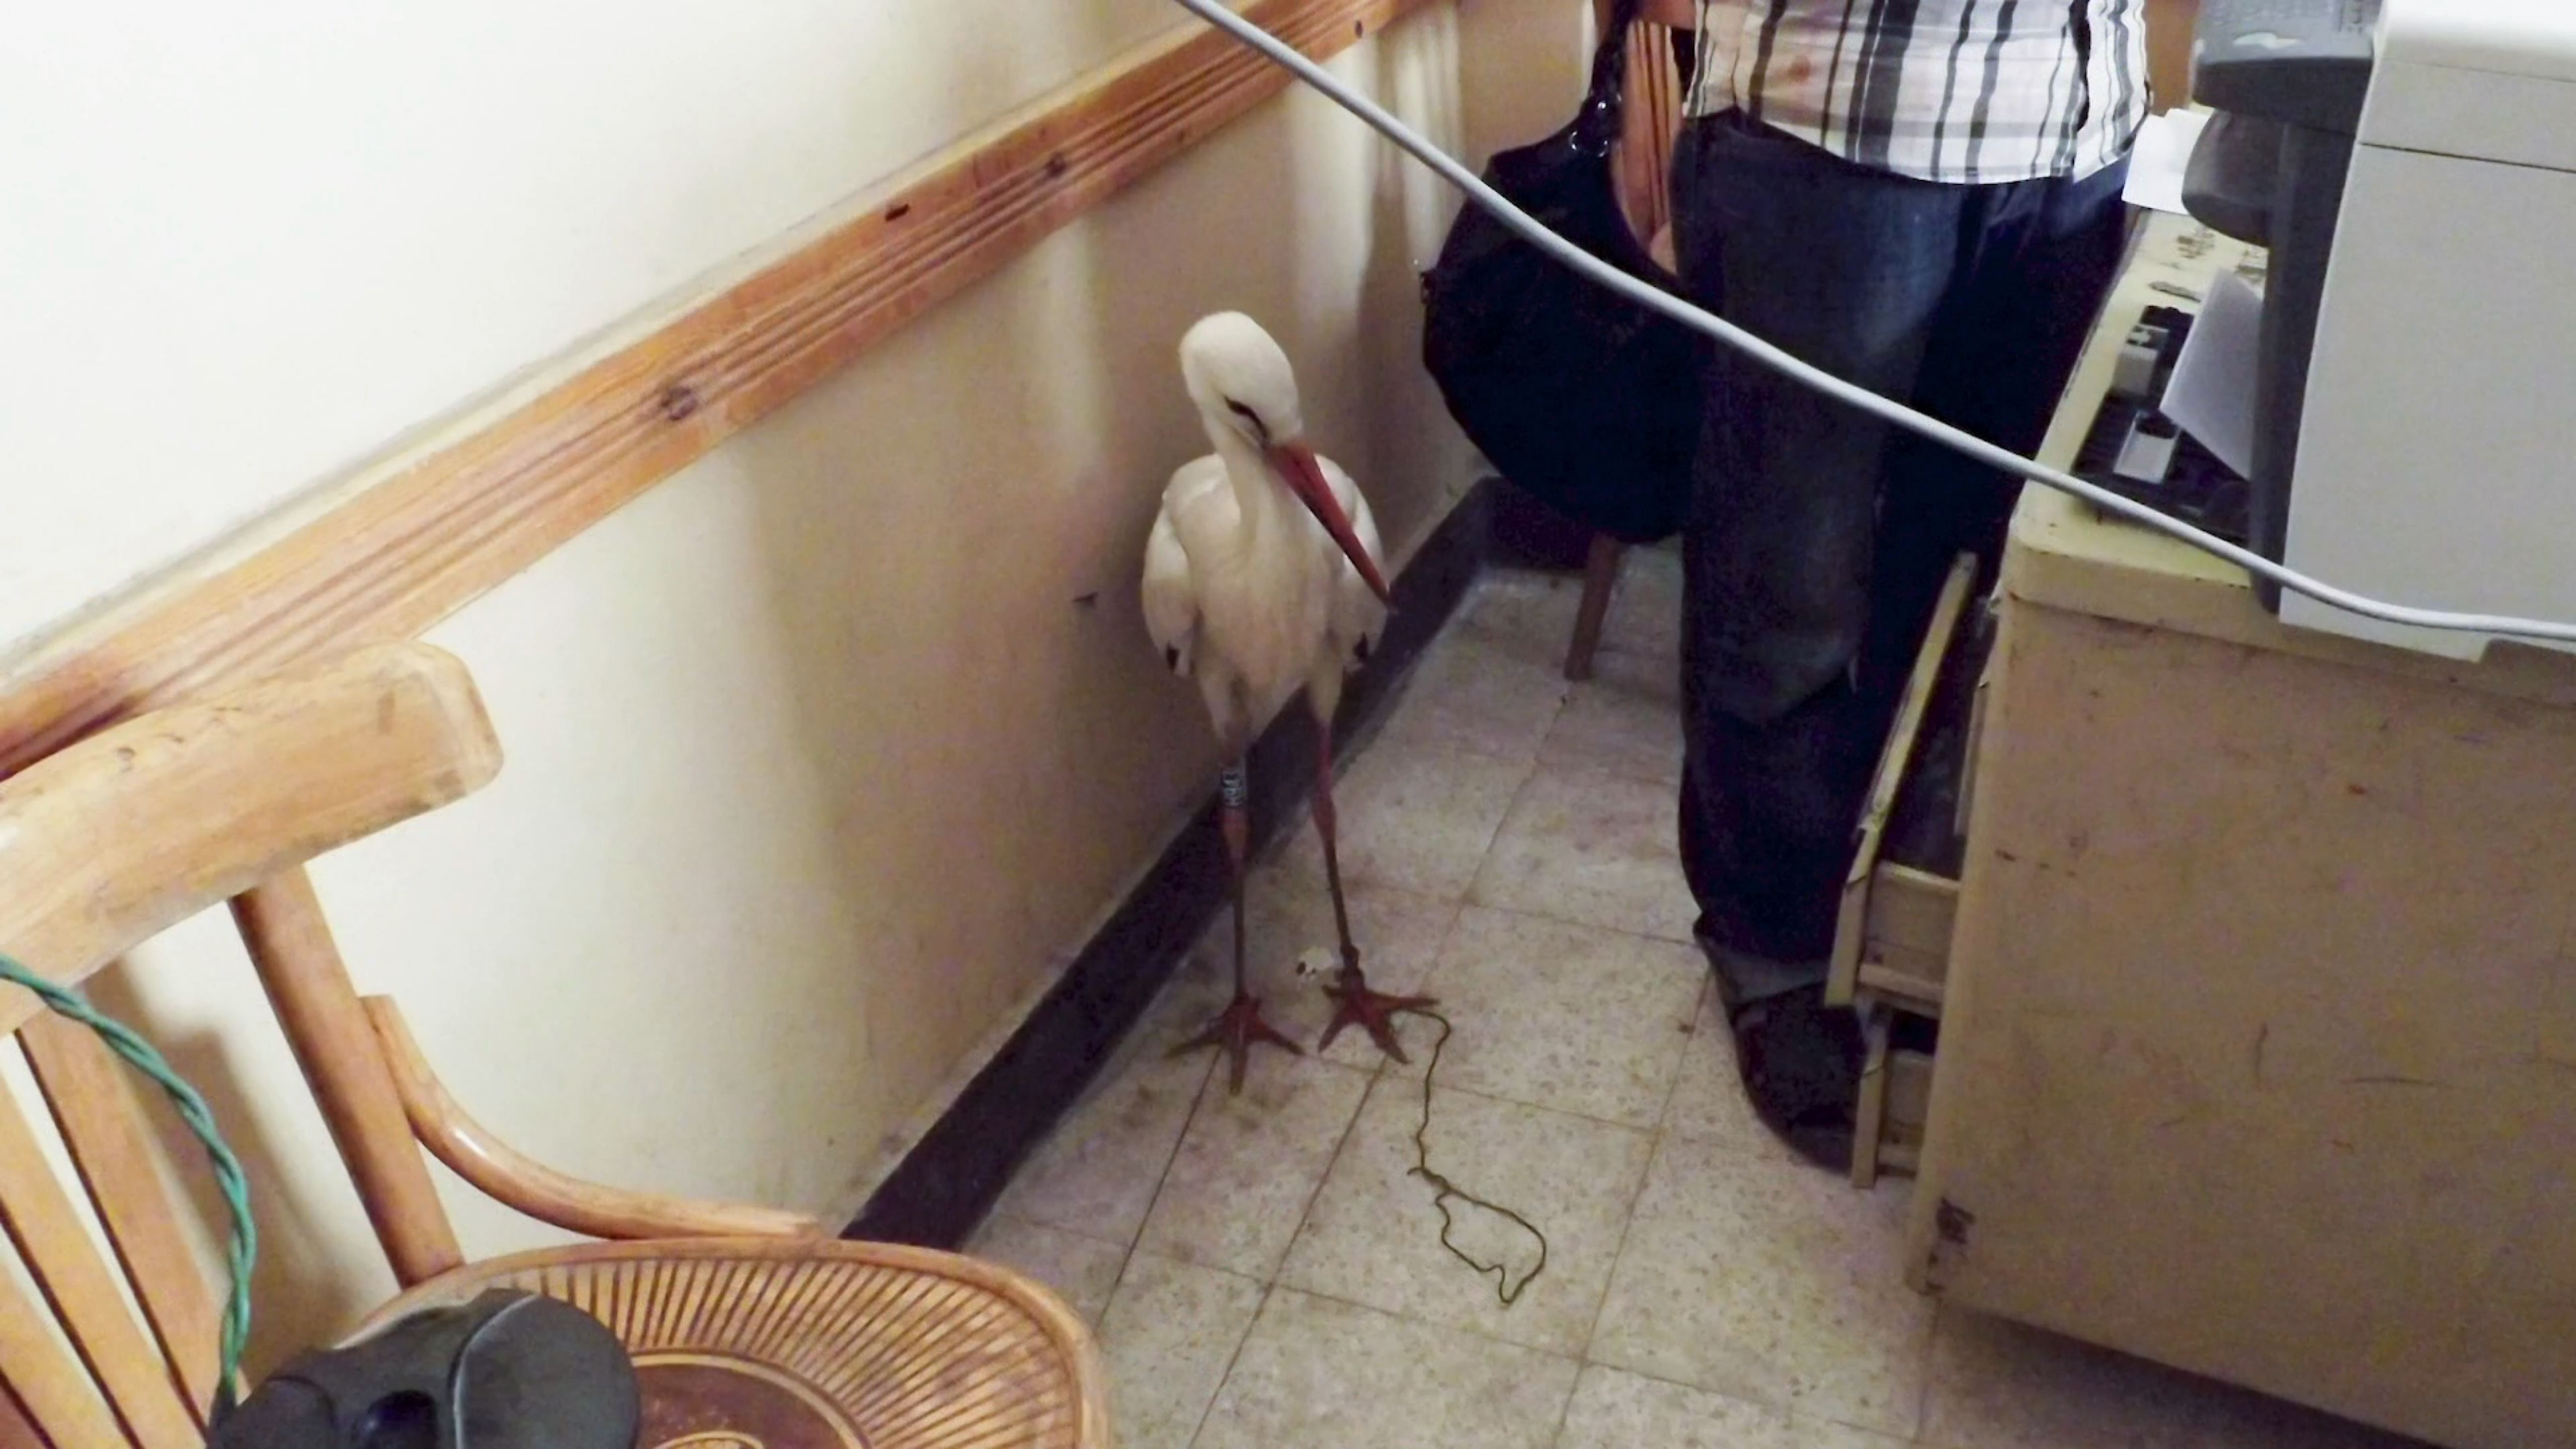 A white bird is standing on a tiled floor behind a desk, a man stands near the desk